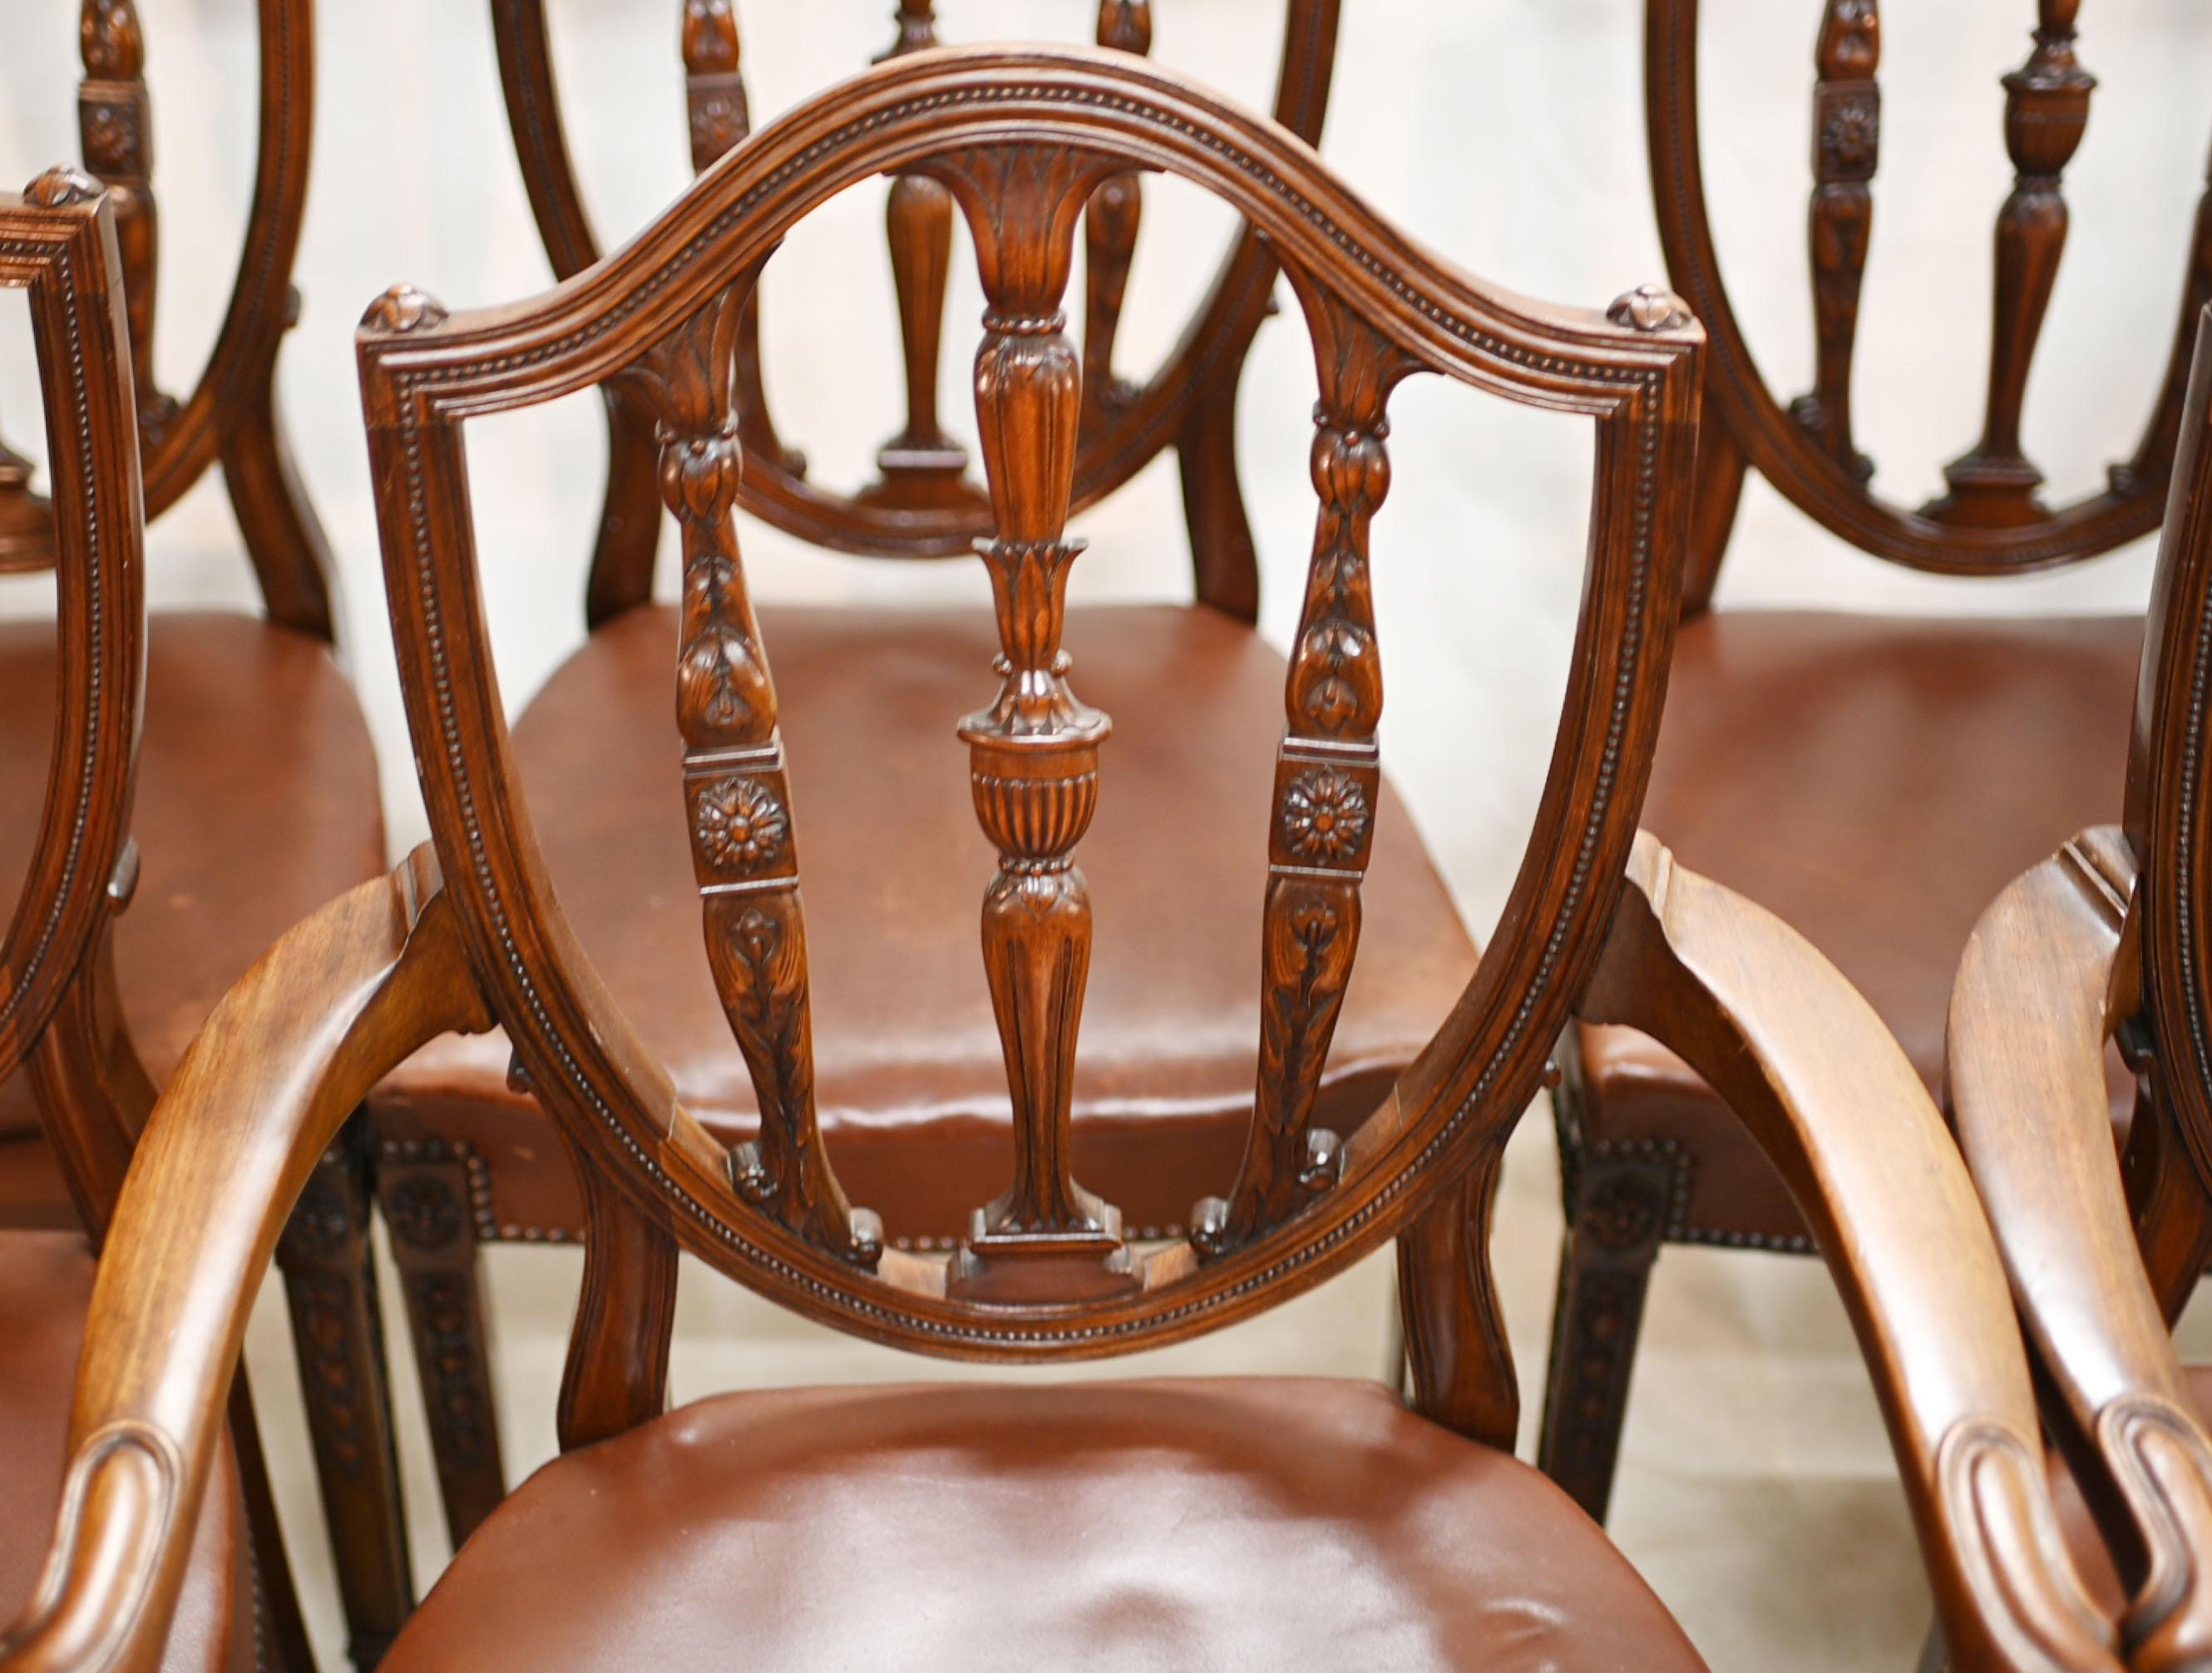 Elegant and refined set of 8 dining chairs after Hepplewhite
Classic hand carved back rest with urn motifs and rosettes
Set of 8 chairs - including two arm chairs
We date these chairs to circa 1880
Offered in great shape ready for home use right